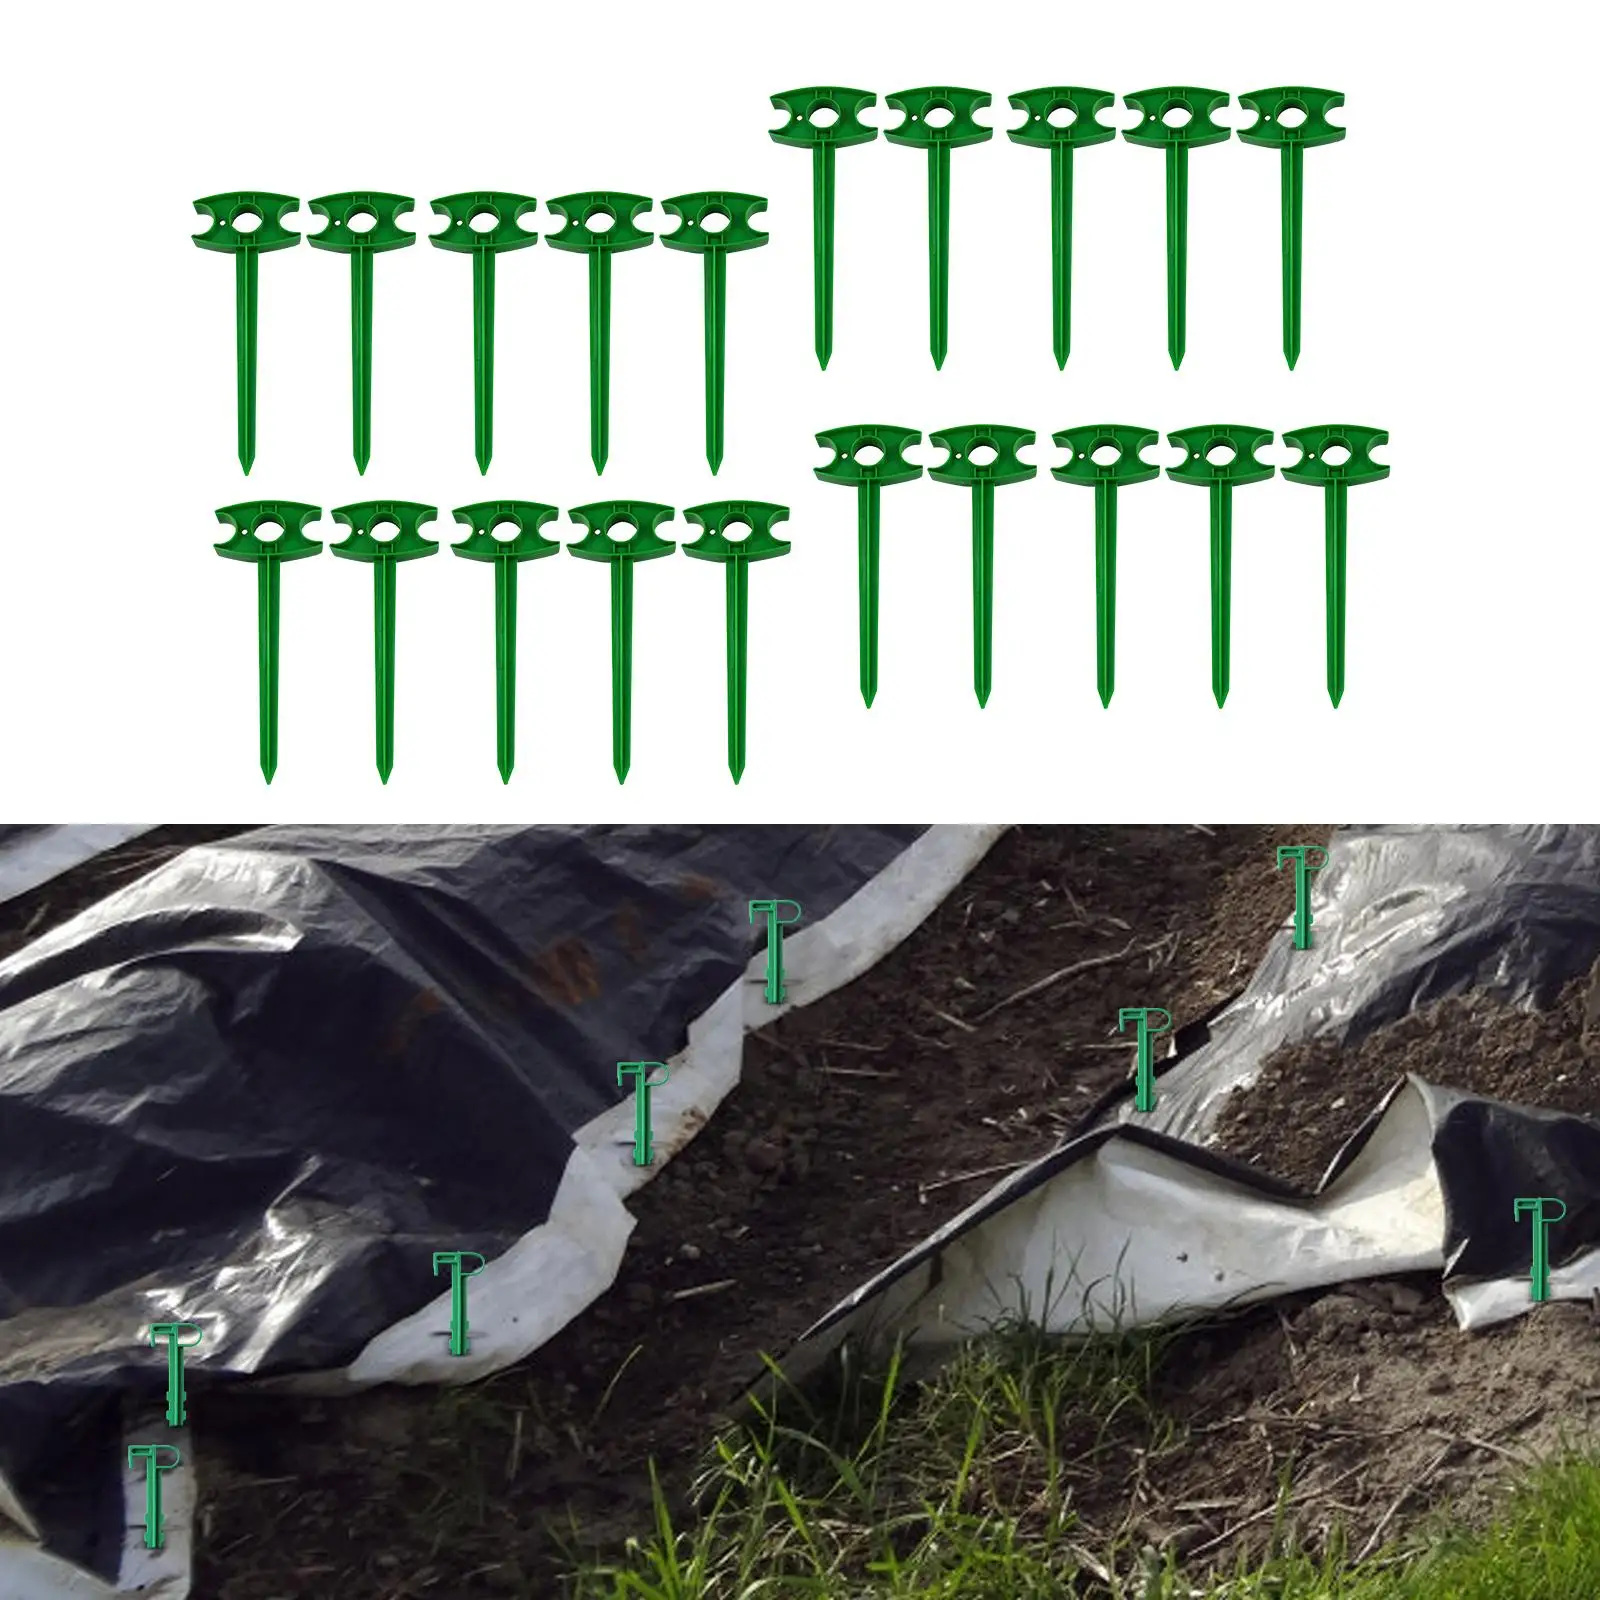 20Pcs Landscape Stakes Tents Edging Nails Anchor Yard Garden Stakes for Tents Securing Camping Landscape Fabric Lawn Edging